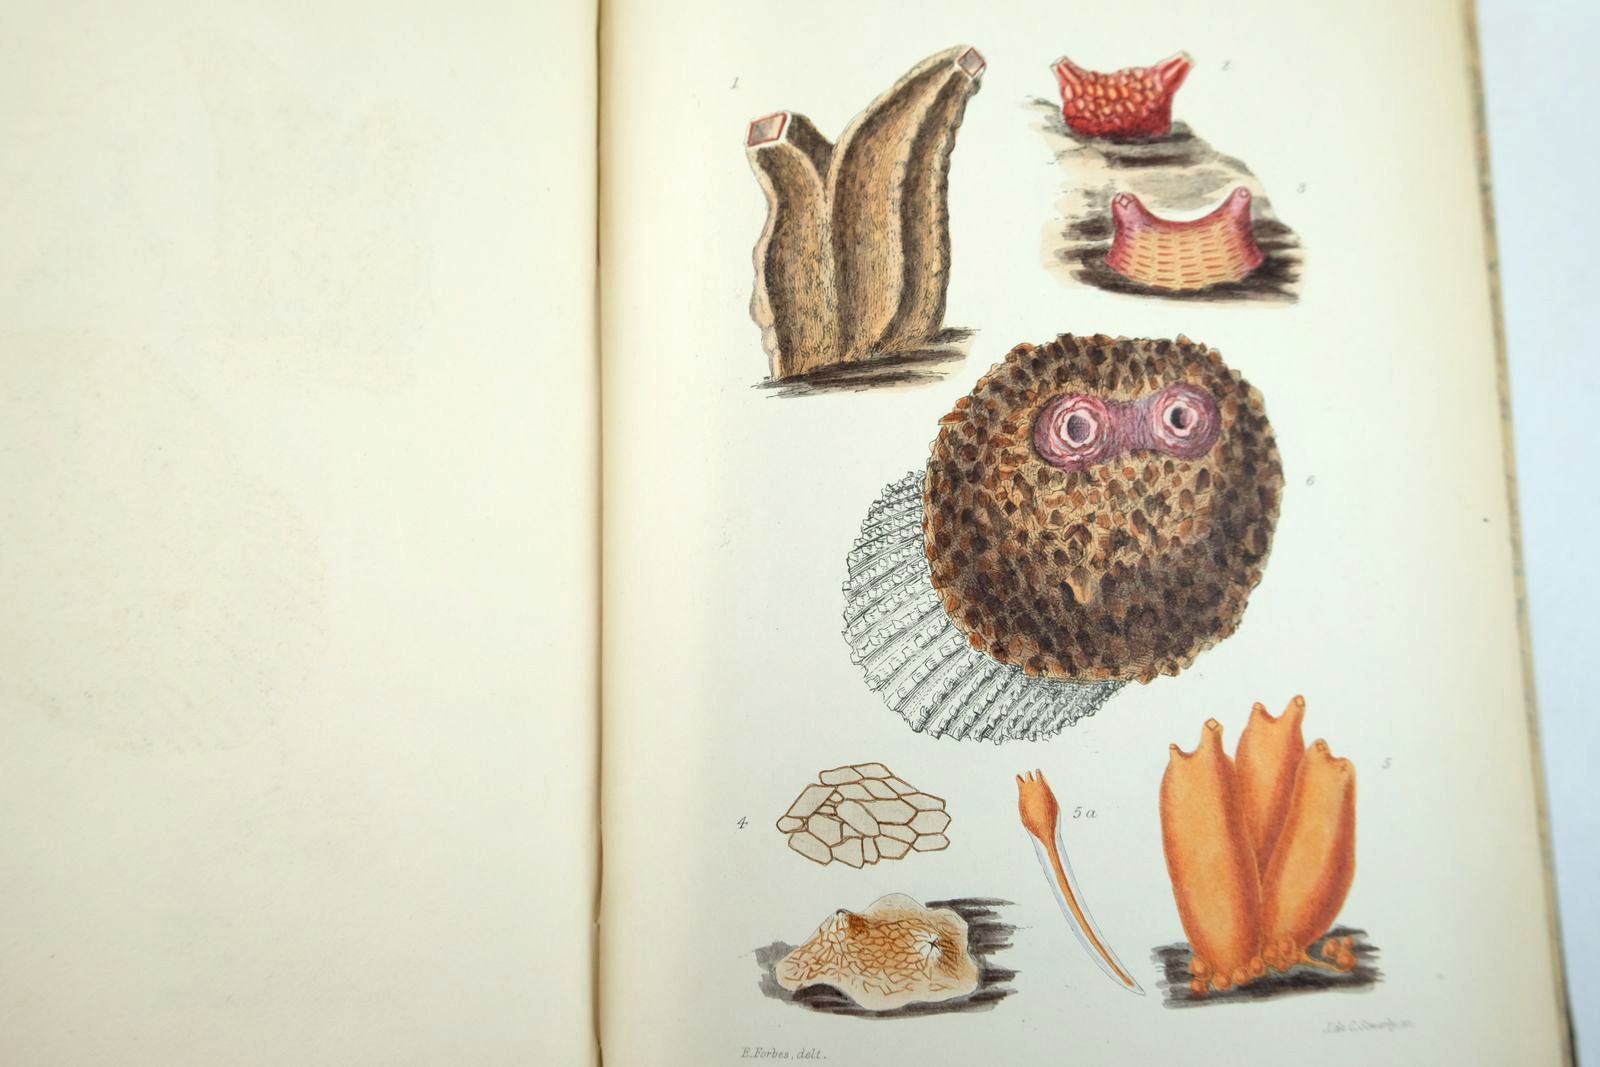 Photo of A HISTORY OF BRITISH MOLLUSCA, AND THEIR SHELLS (4 VOLUMES) written by Forbes, Edward
Hanley, Sylvanus published by John Van Voorst (STOCK CODE: 2133307)  for sale by Stella & Rose's Books